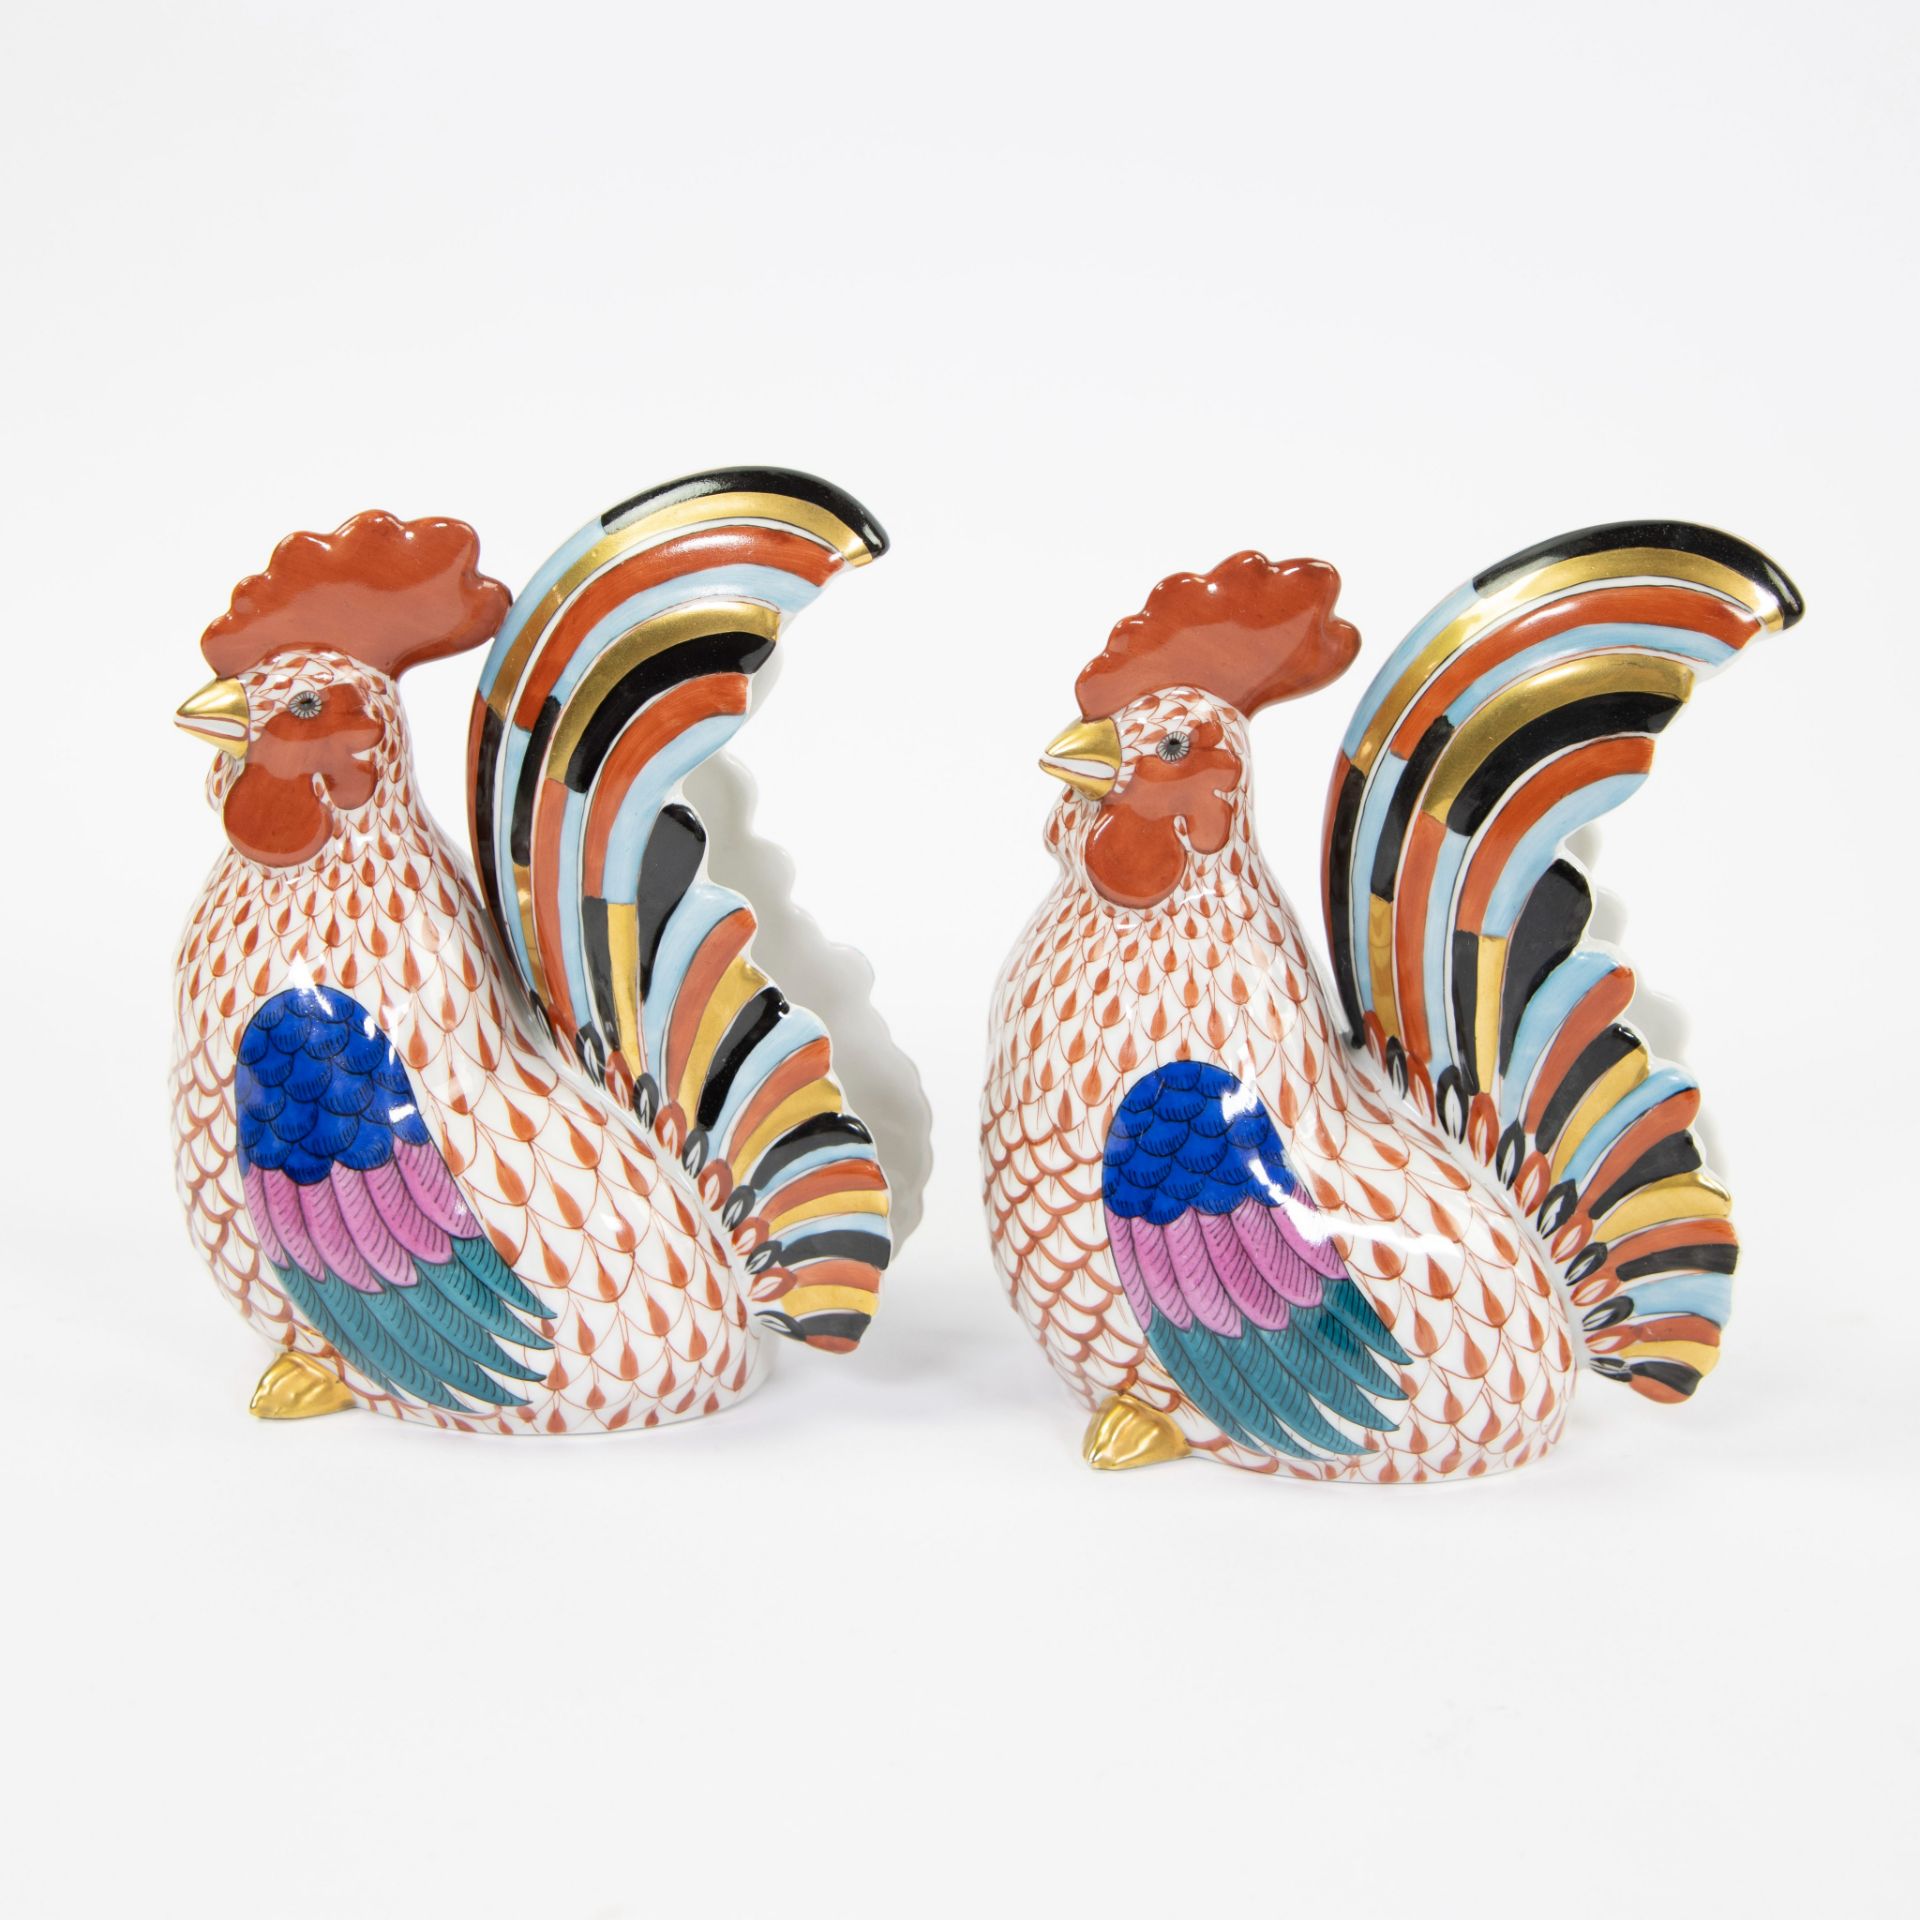 Pair of Herend roosters in porcelain hand-painted decoration in gold-green-blue-black-pink. marked. - Image 2 of 8